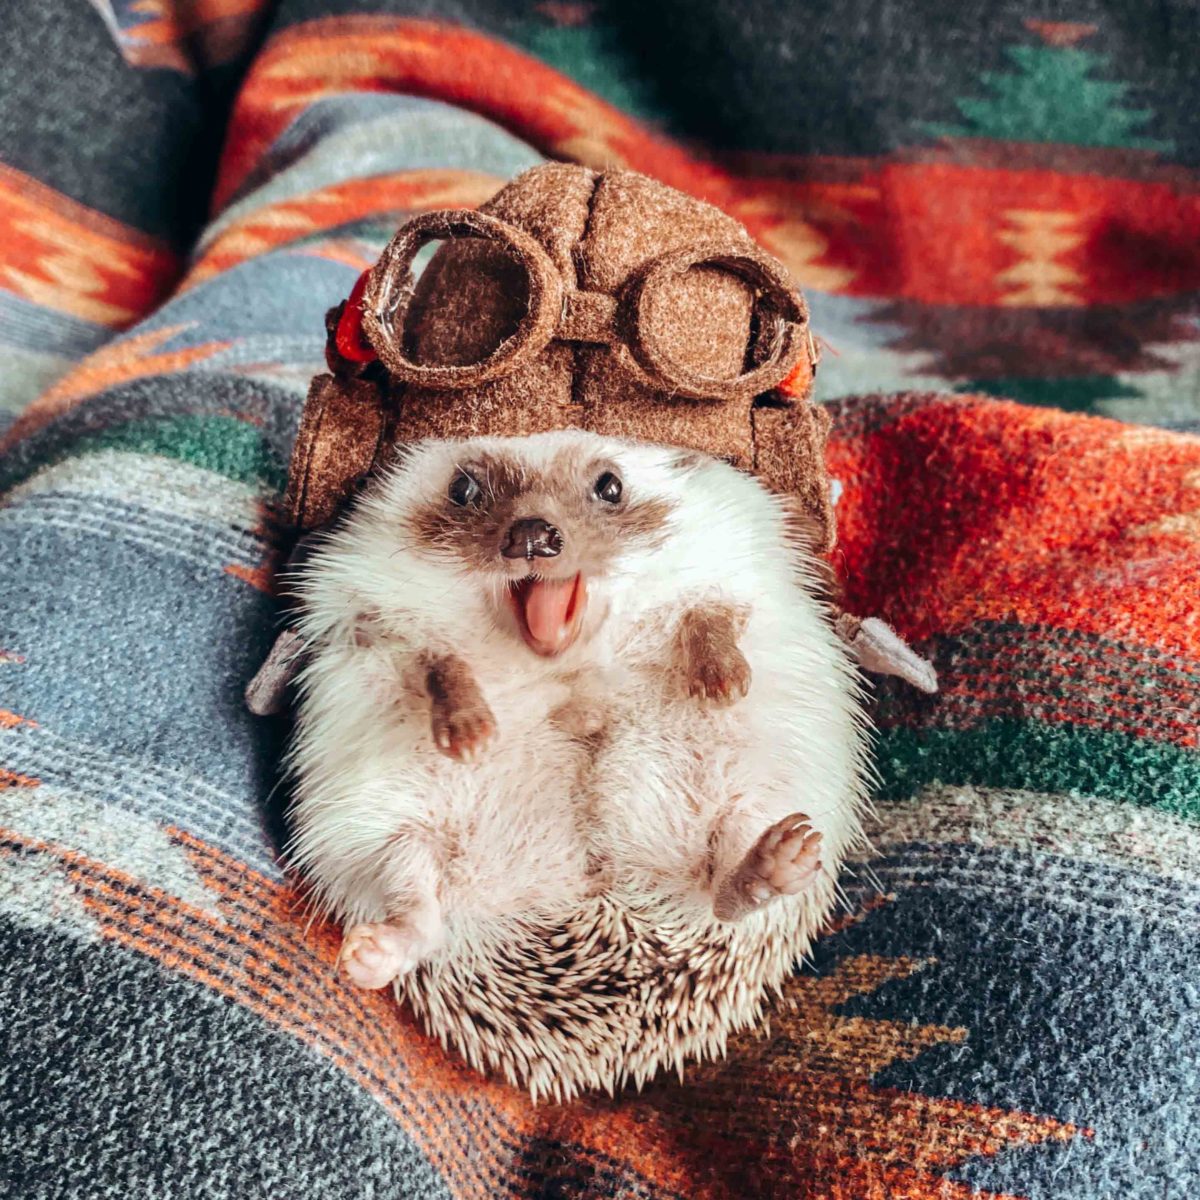 A small hedgehog wearing a hat with glasses while looking into the camera